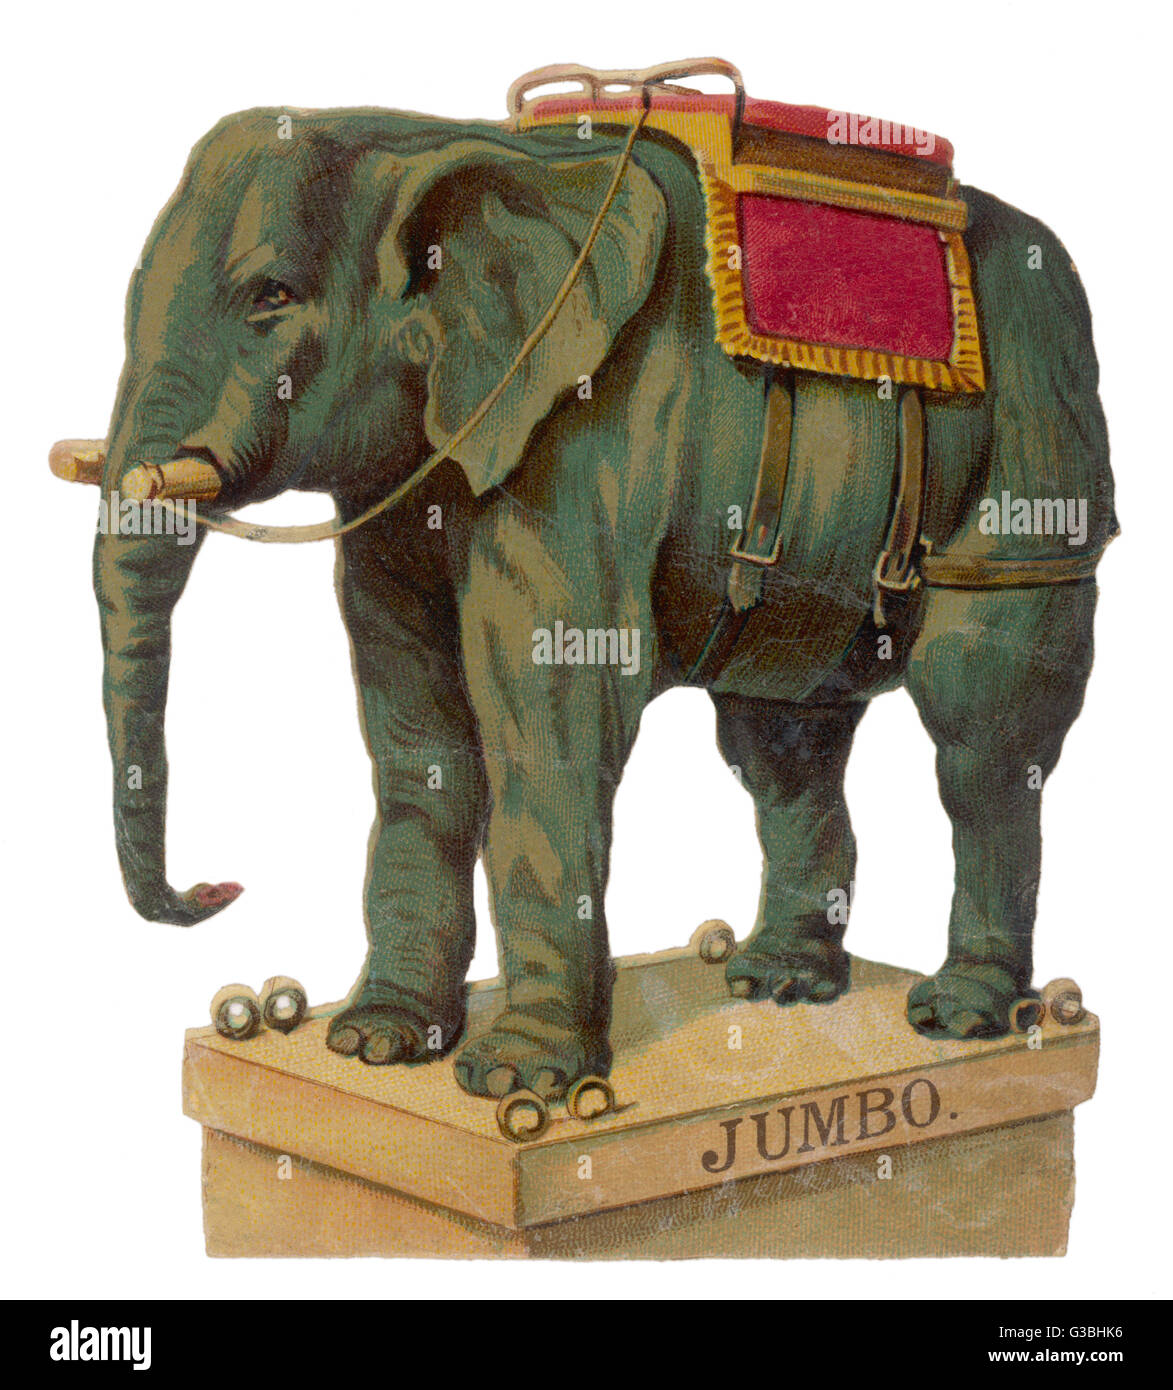 Jumbo, standing ready to give someone a ride.        Date: mid-19th century Stock Photo